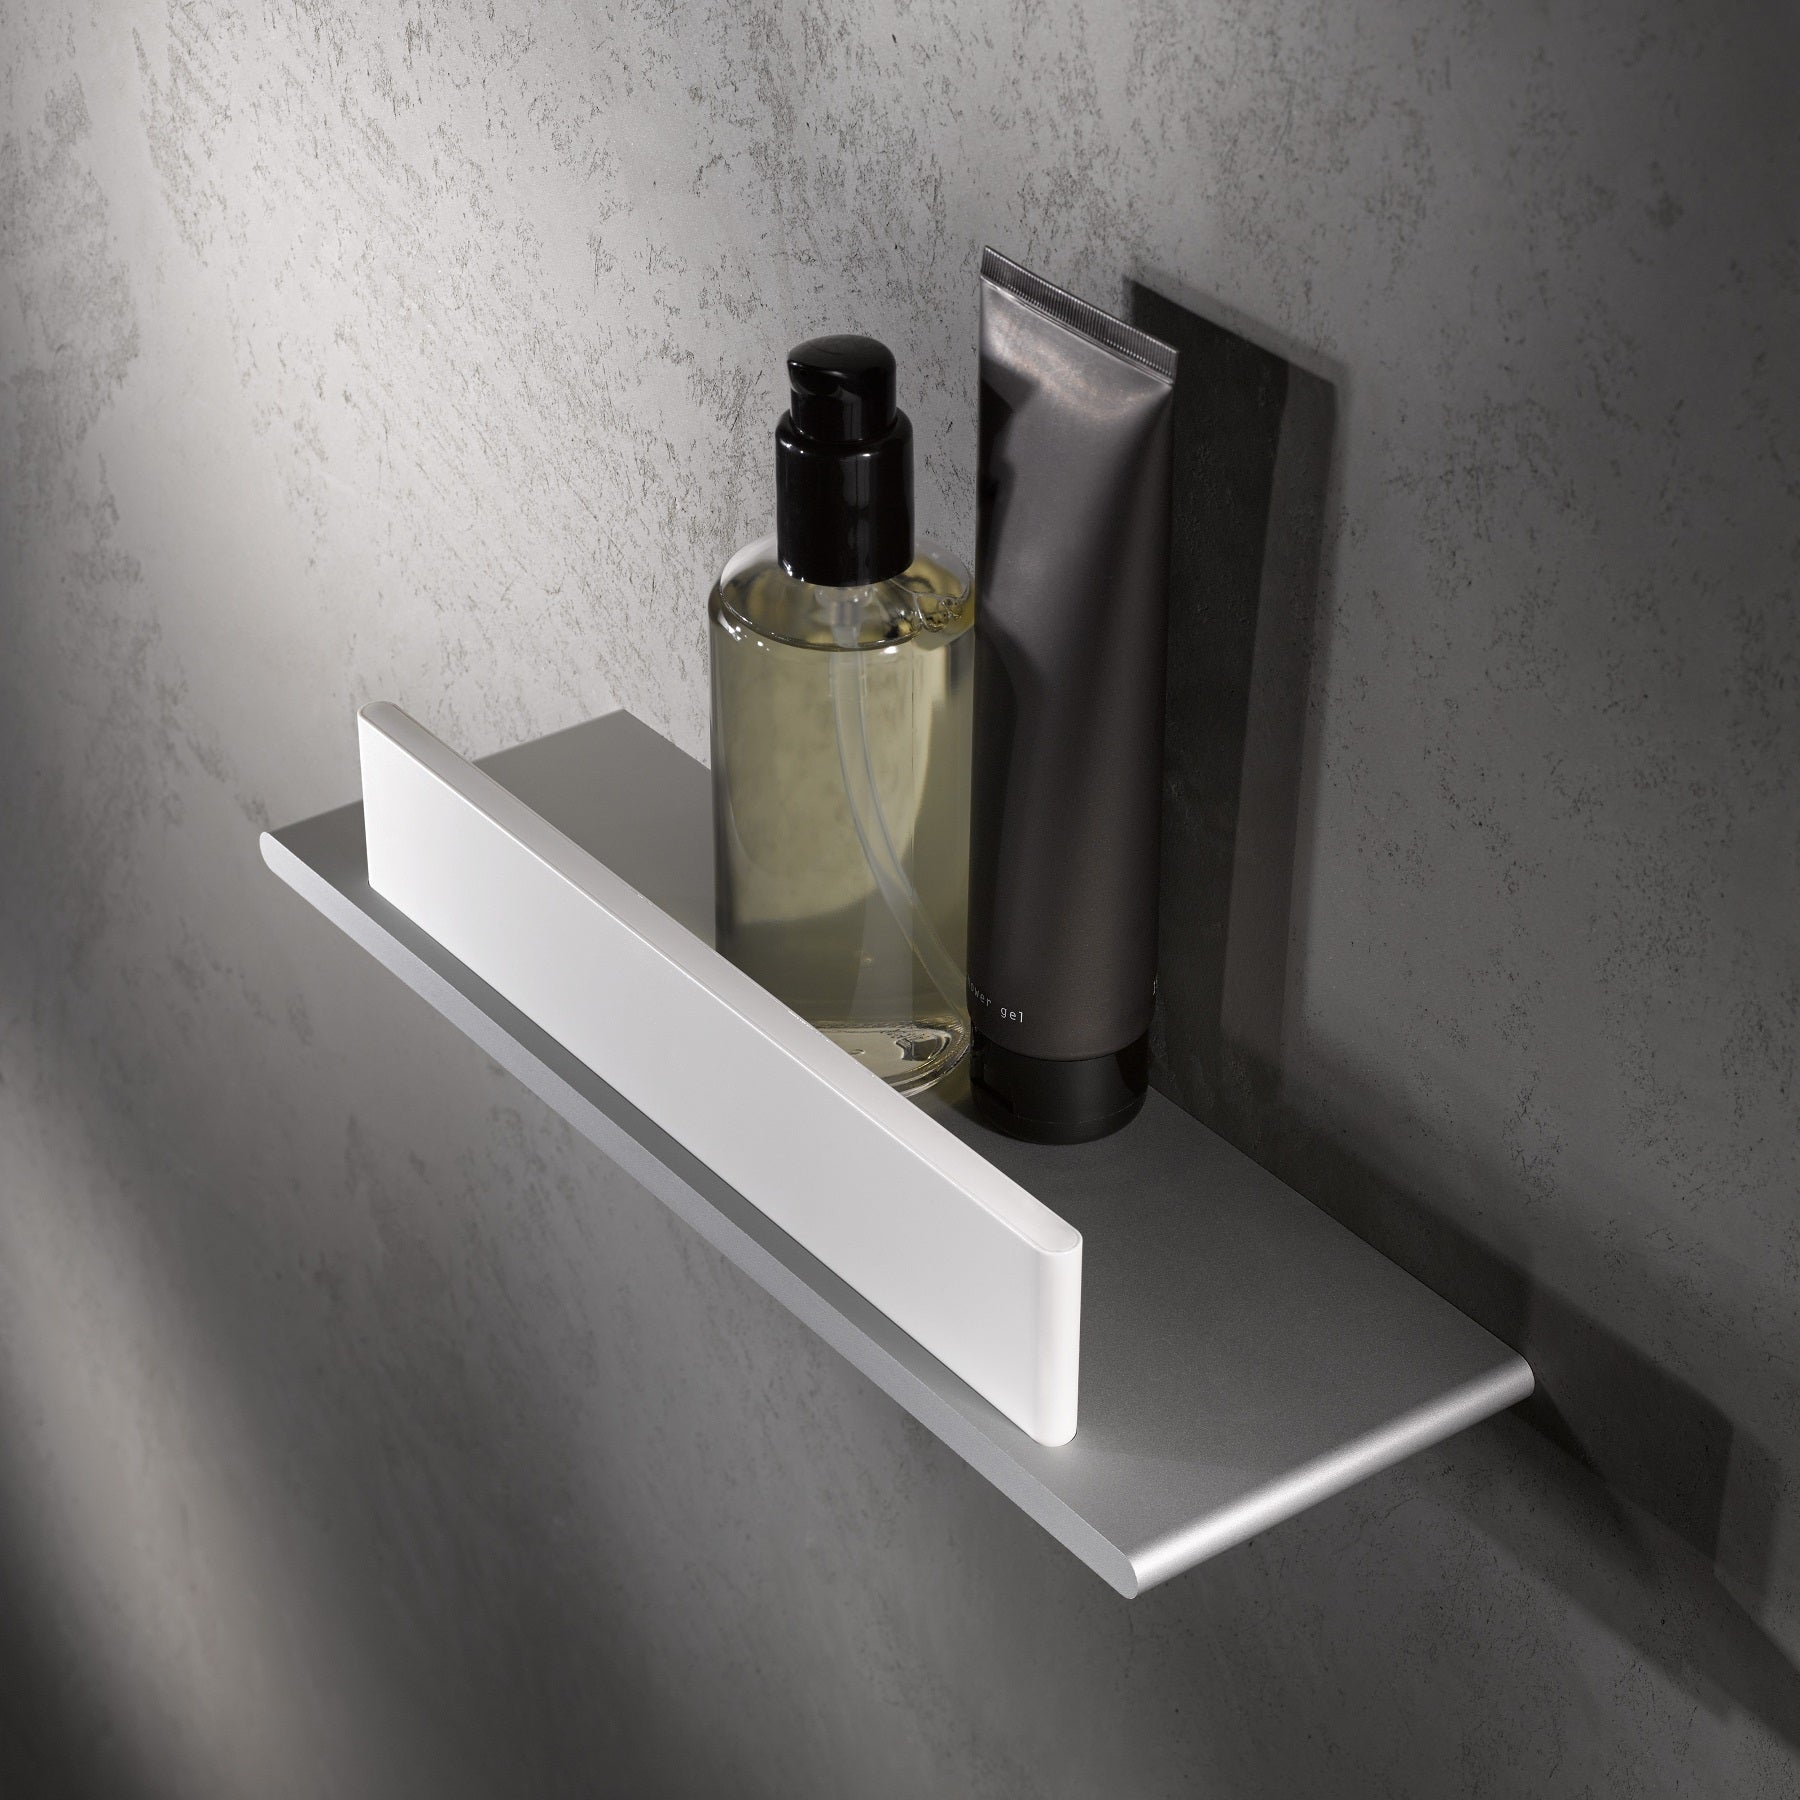 Keuco Edition 400 Shower Shelf with squeegee